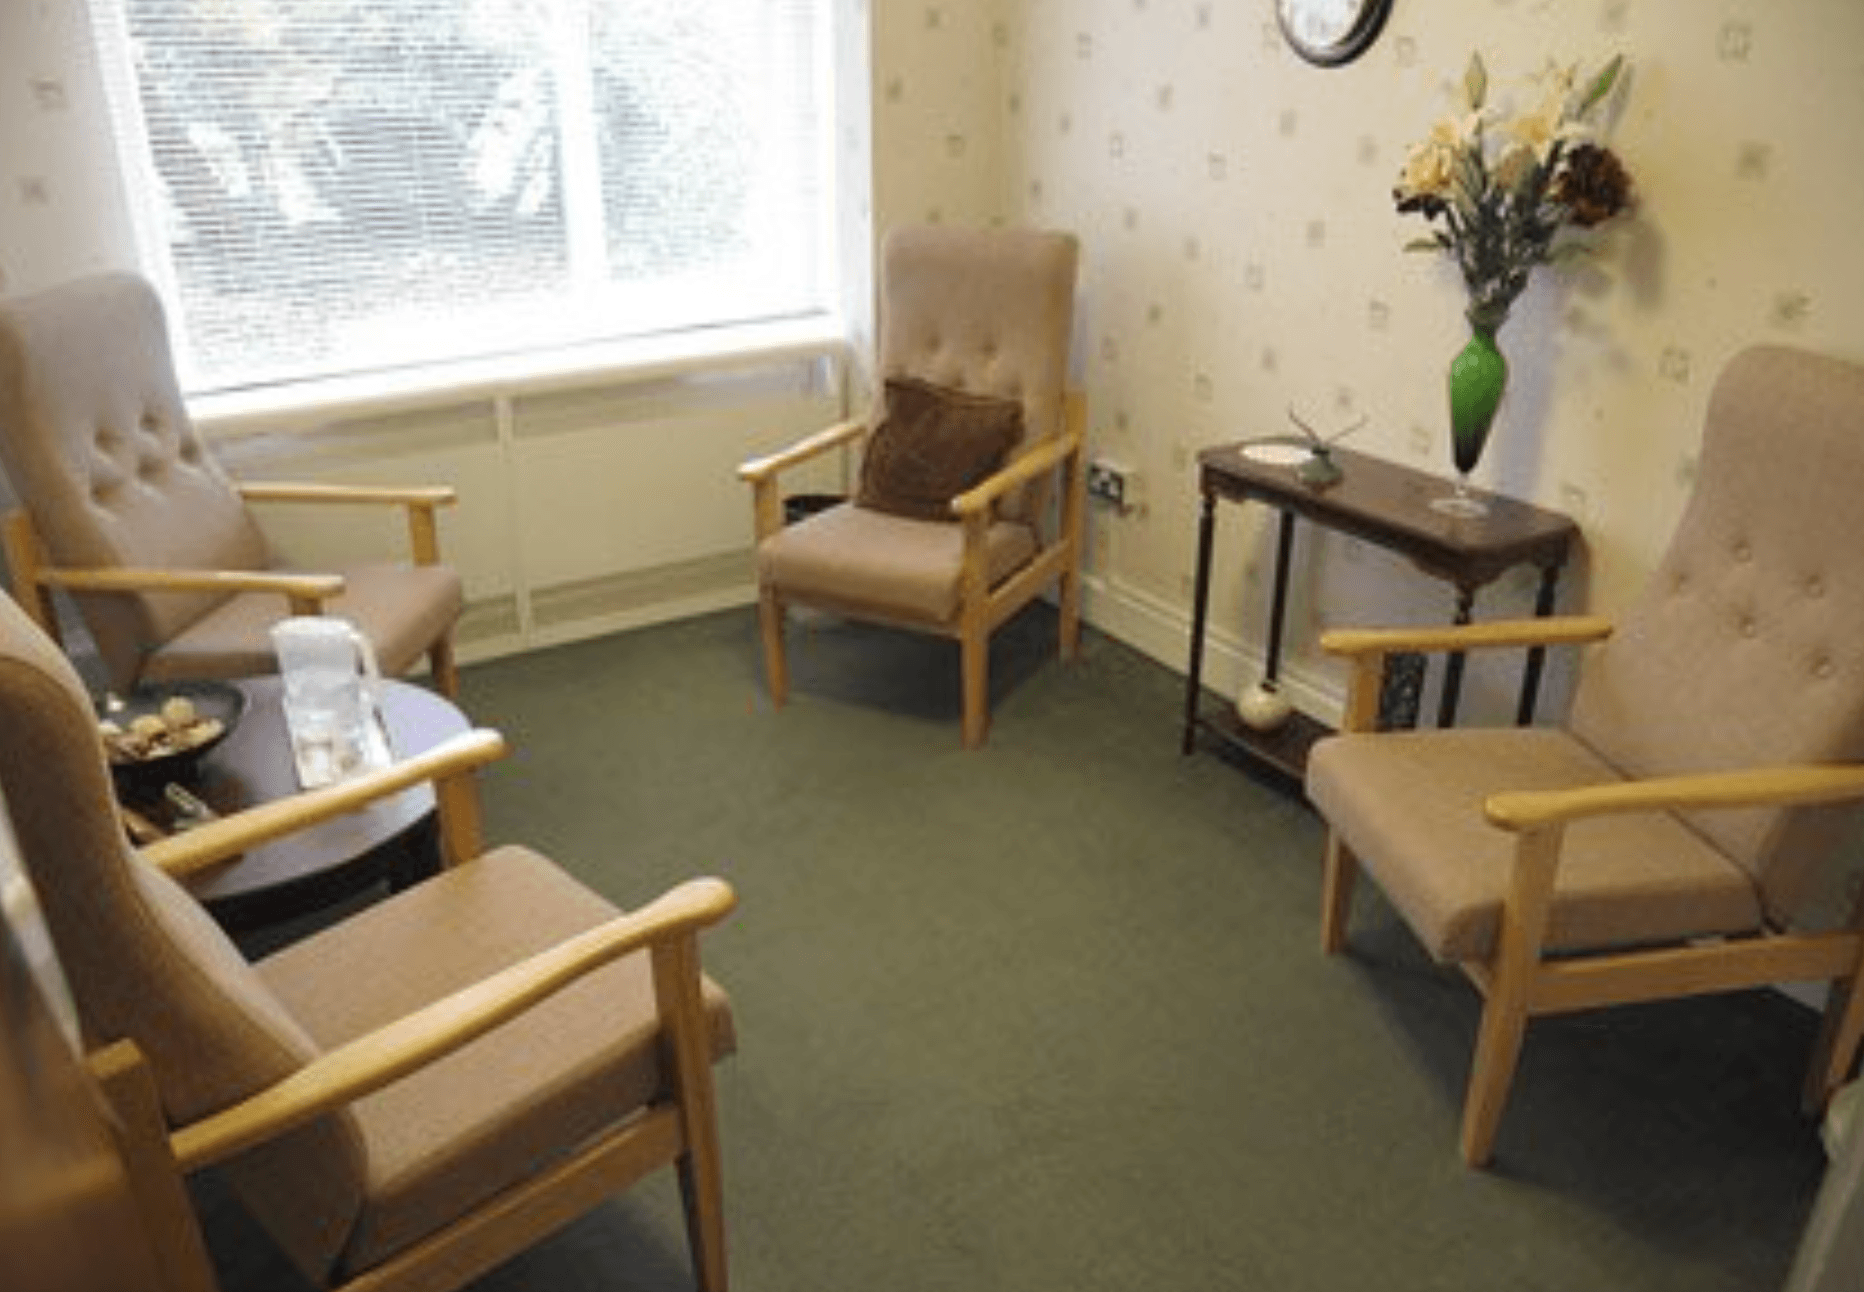 Lounge of Harvey House care home in Leicester